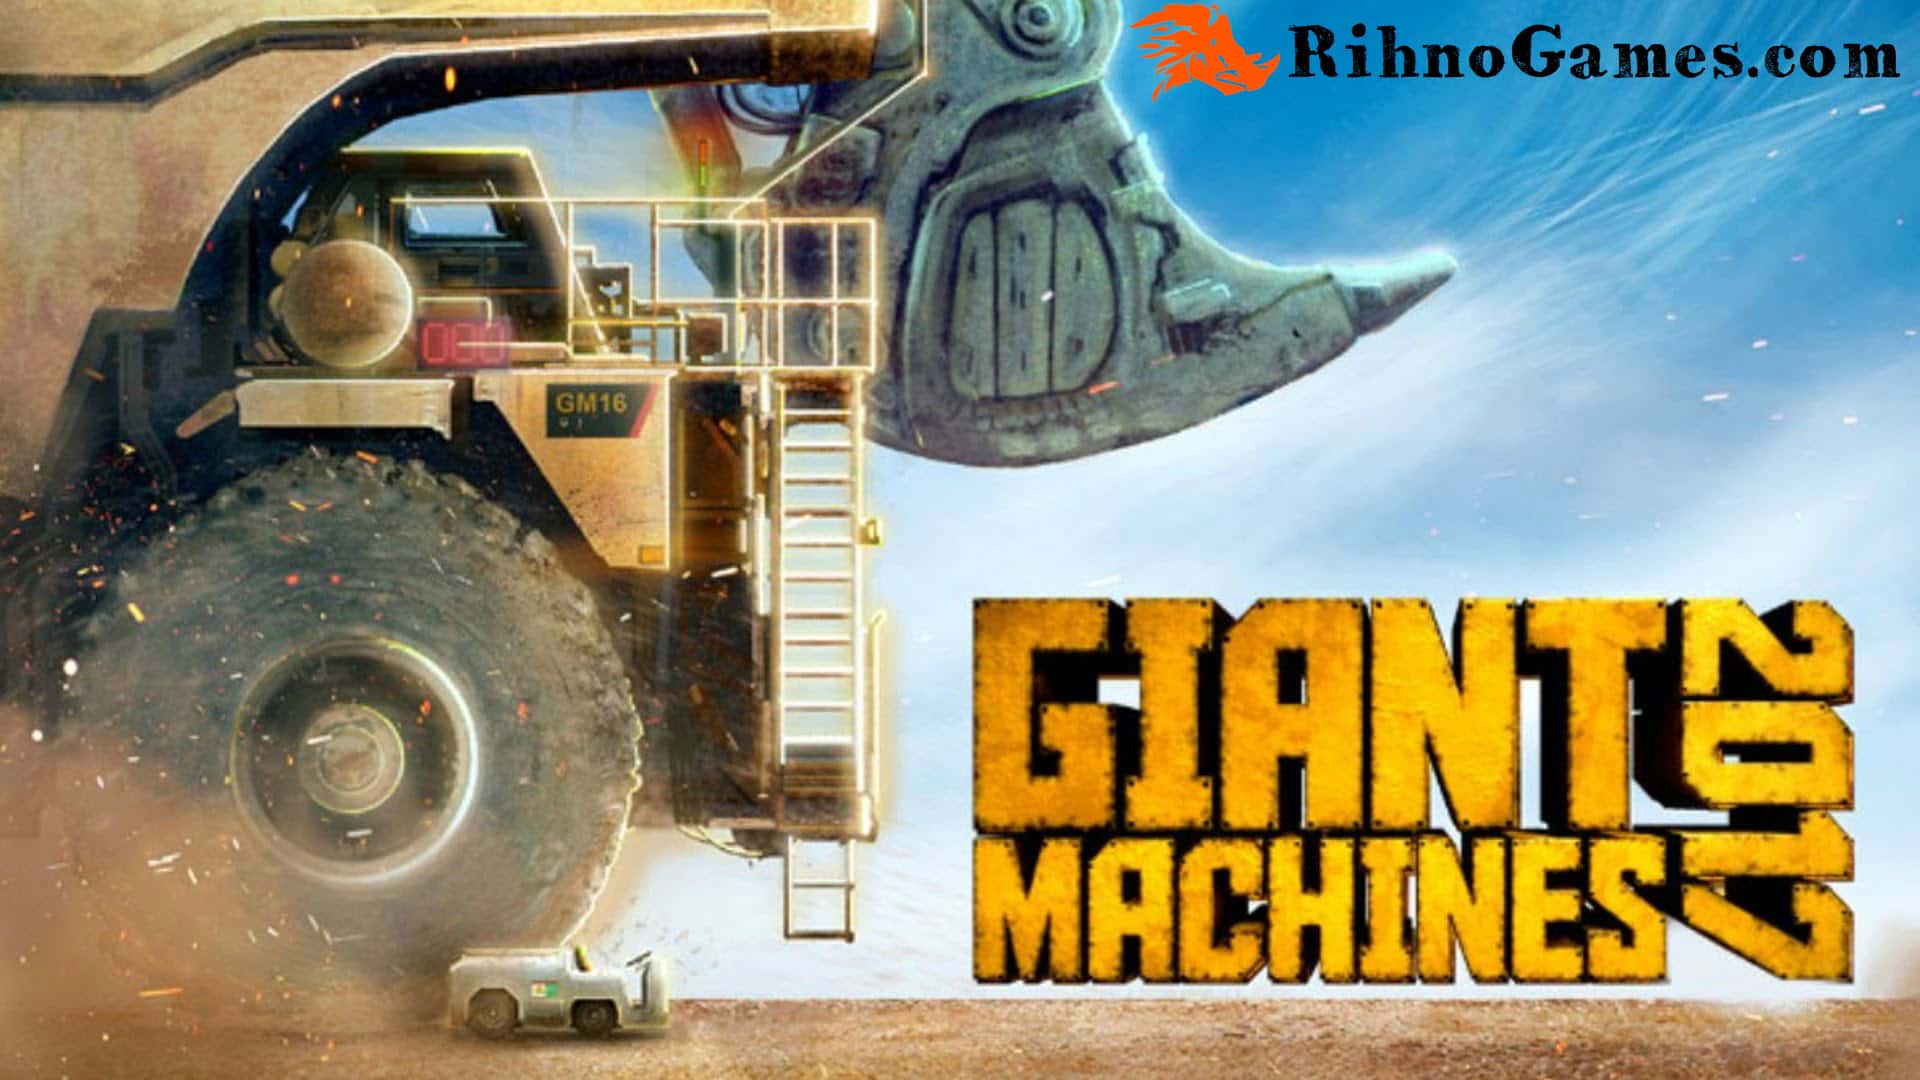 Giant Machines 2017 Download